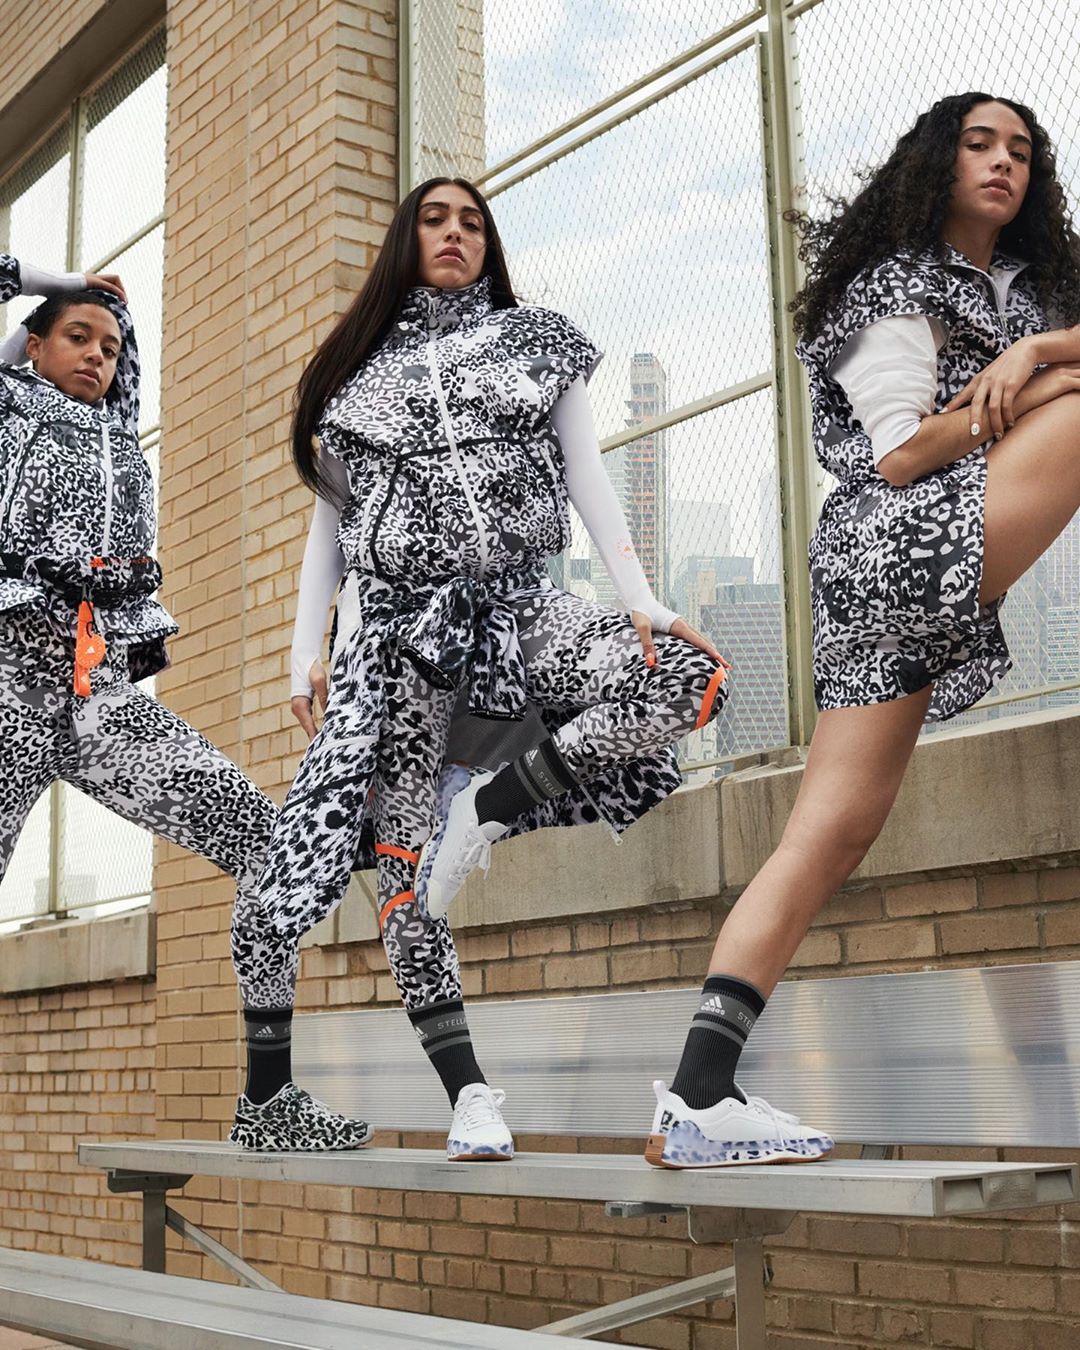 Stella McCartney - “My generation is sensitive to the needs of each other and the planet, and the state of the world affects us.” – Lourdes “Lola” Leon⁣
⁣
Shot in New York City, our #aSMC AW20 campaig...